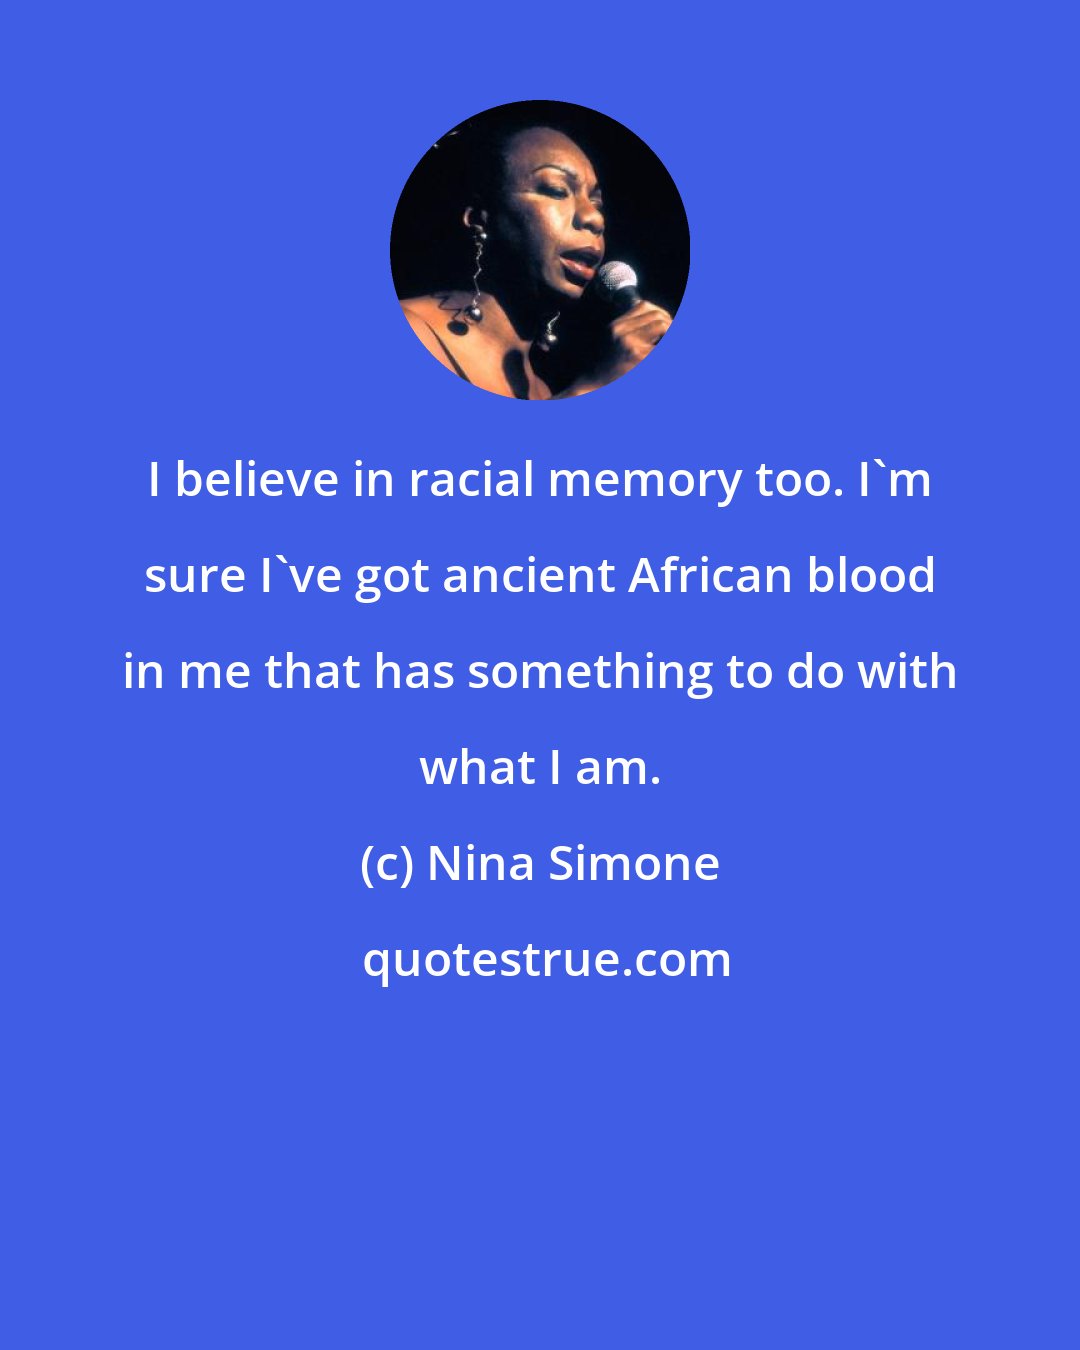 Nina Simone: I believe in racial memory too. I'm sure I've got ancient African blood in me that has something to do with what I am.